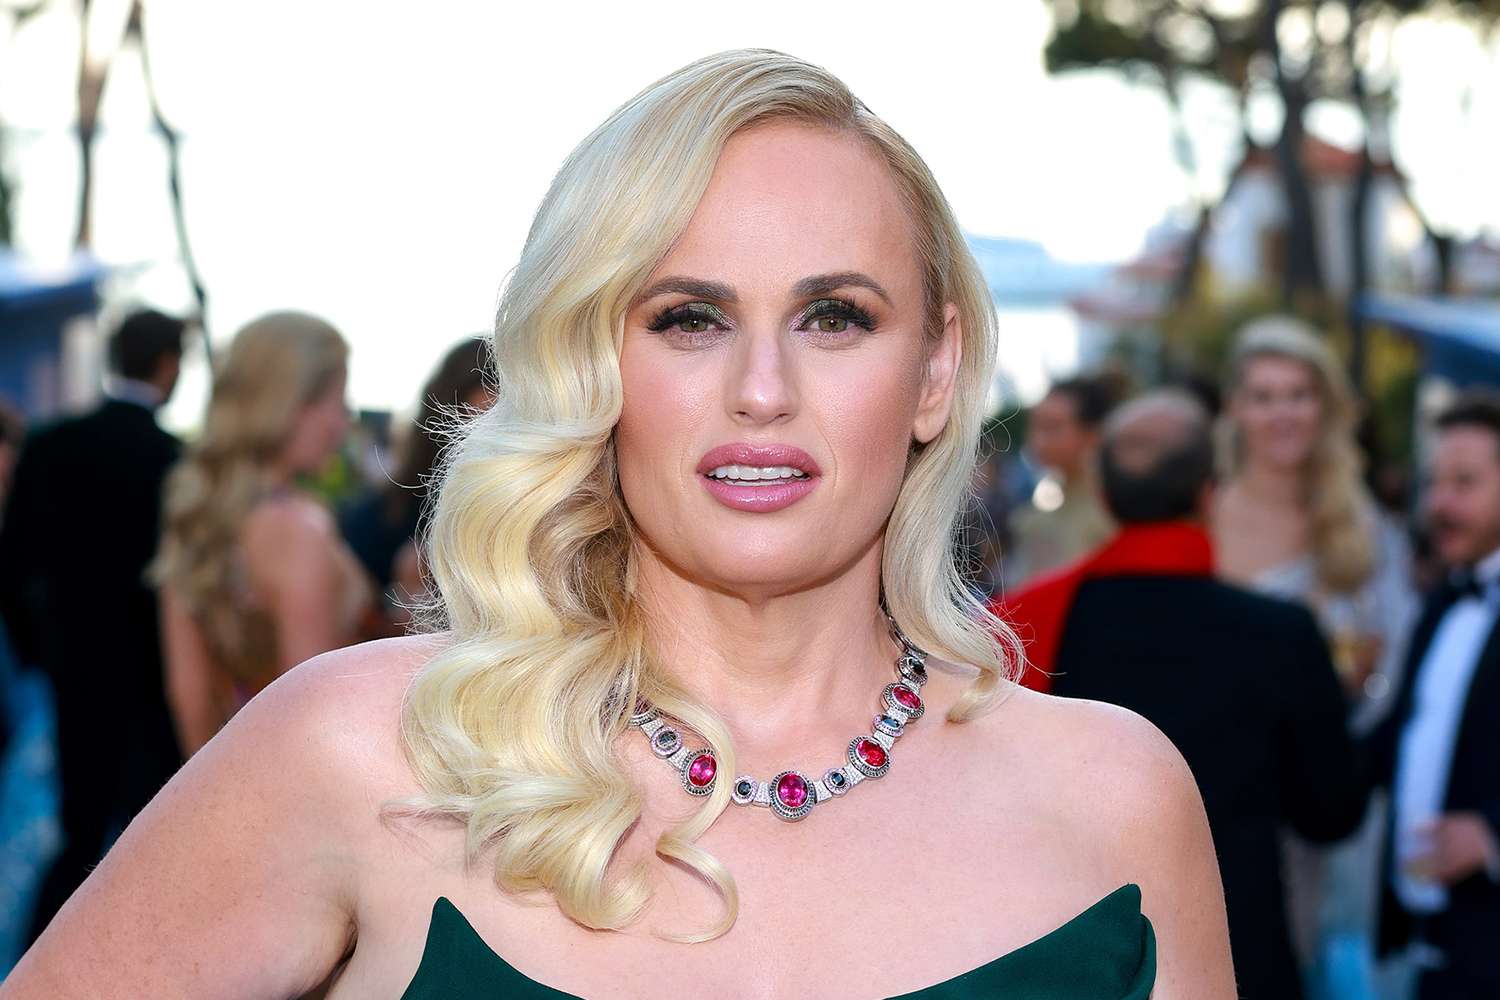 Rebel Wilson invited to a party with drugs, orgies by British royal - Entertainment Weekly News